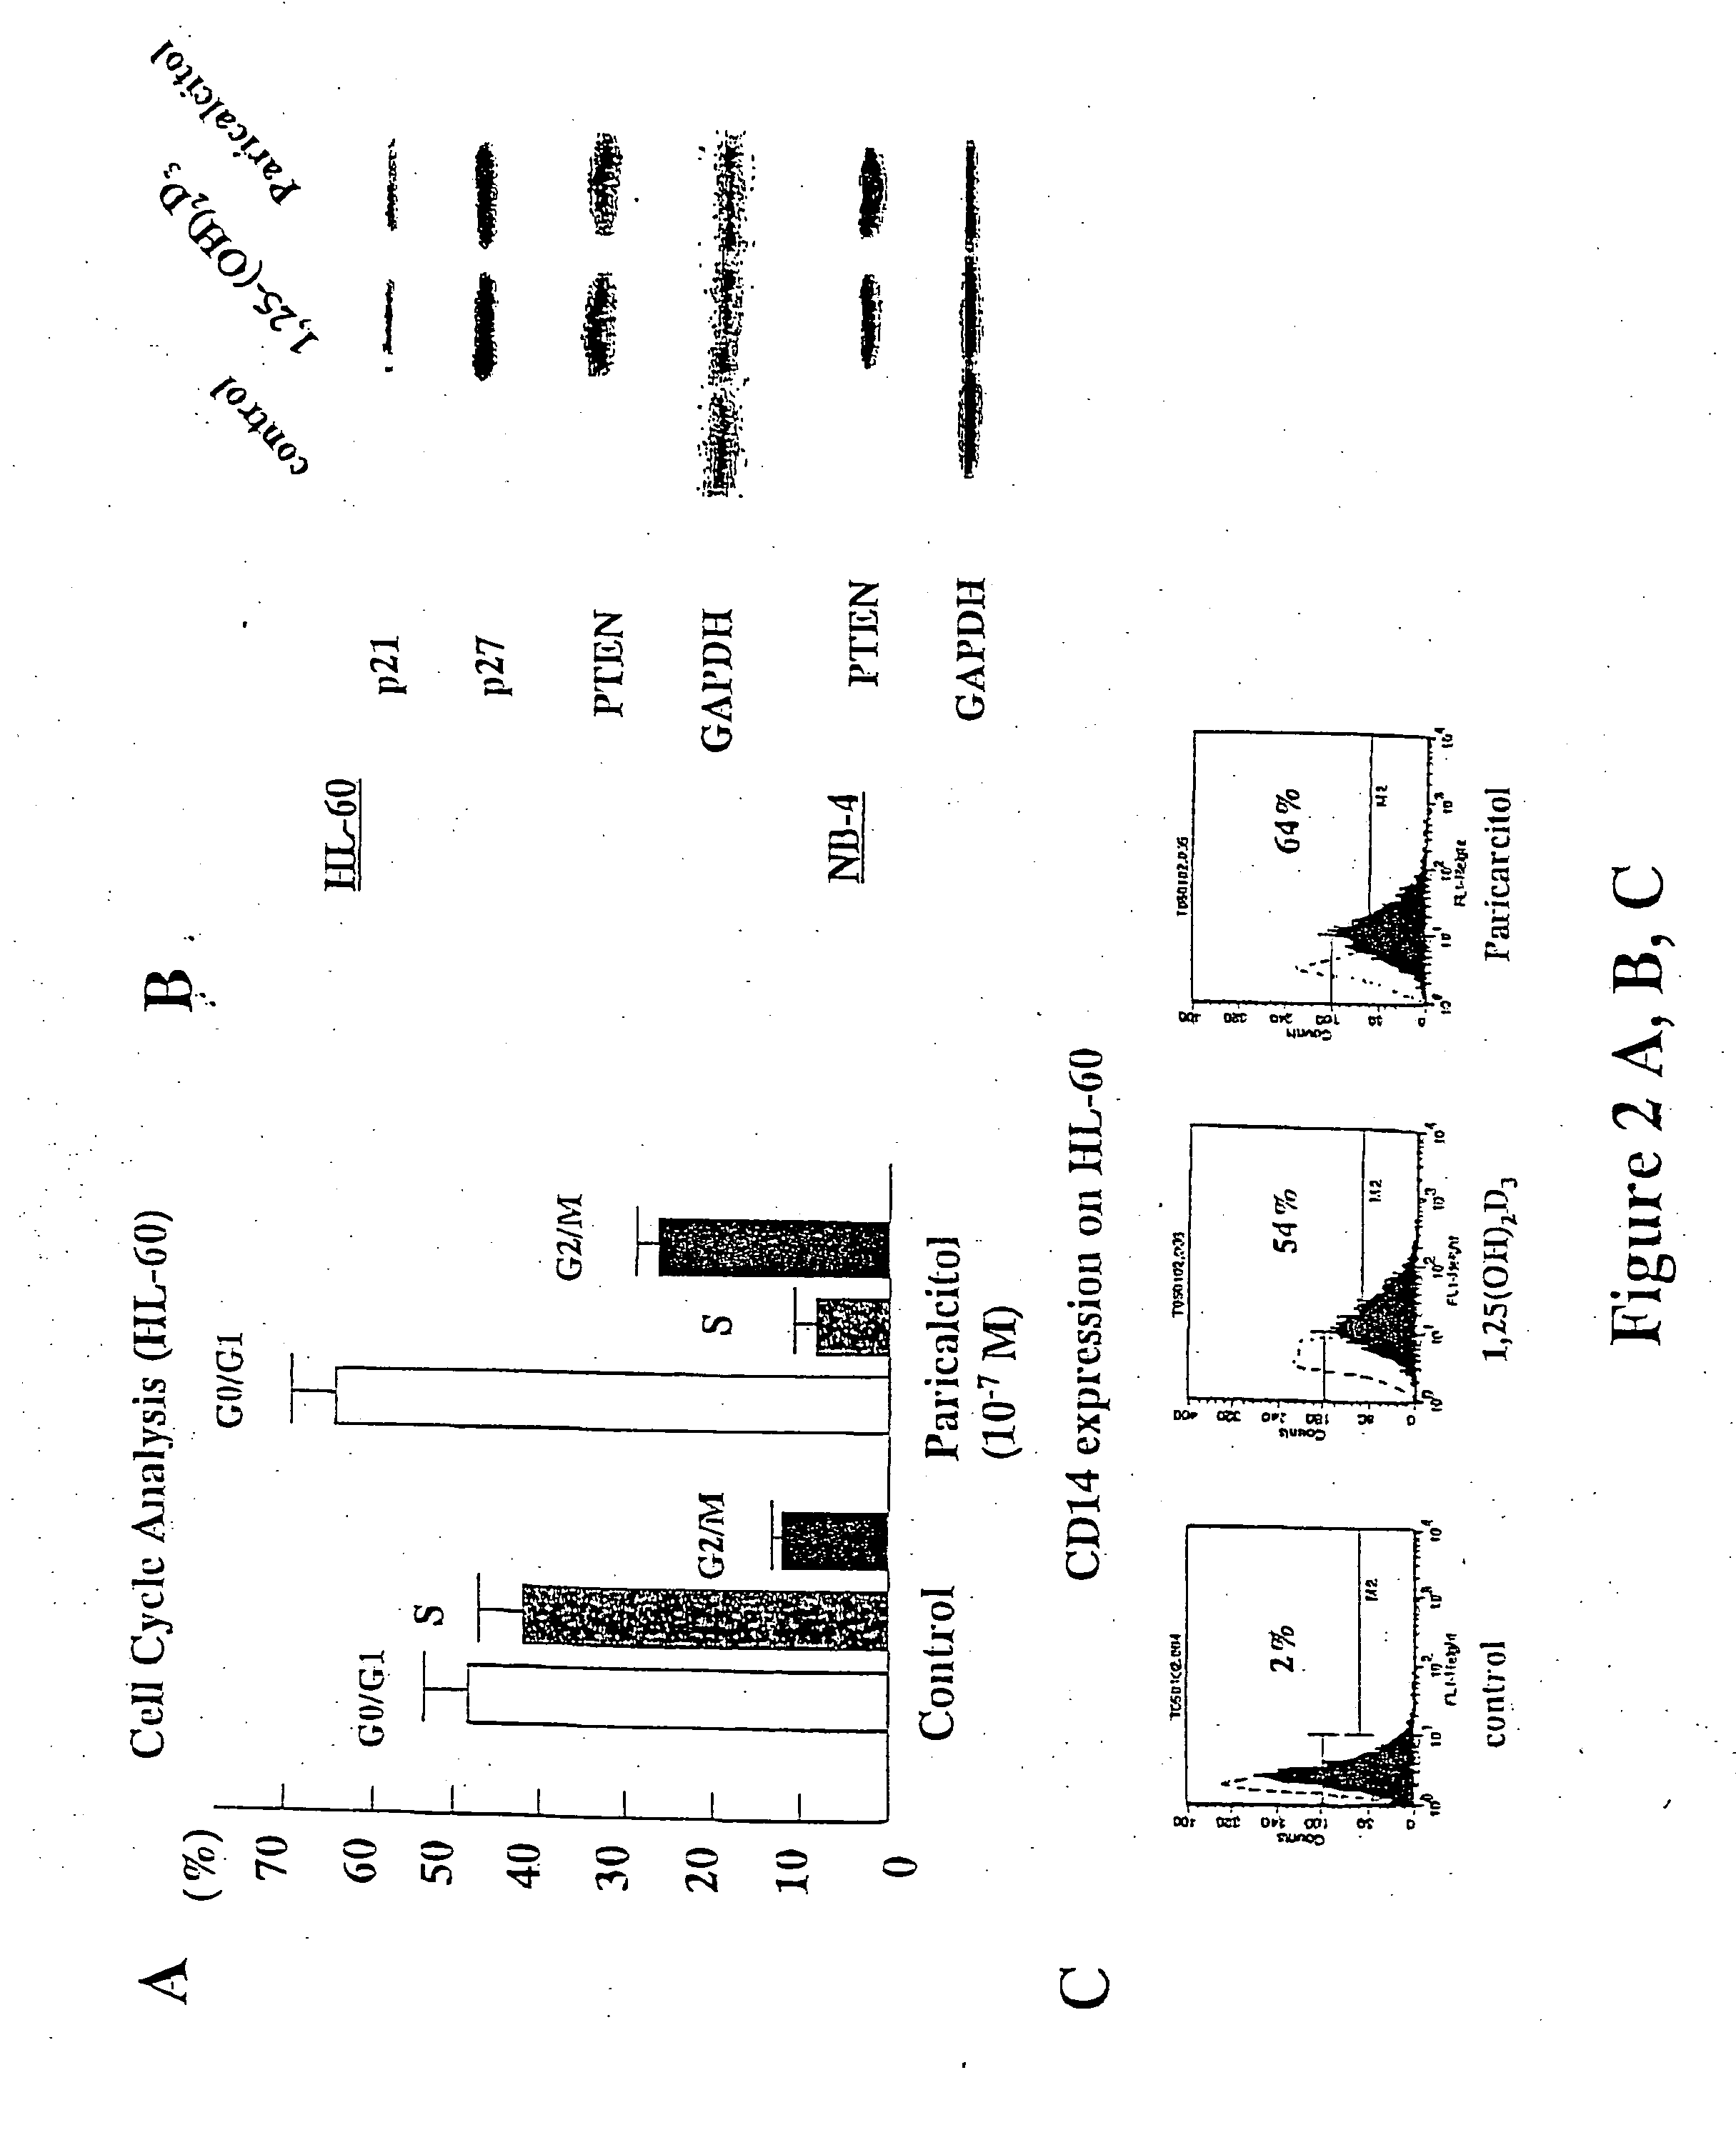 Paricalcitol as a chemotherapeutic agent